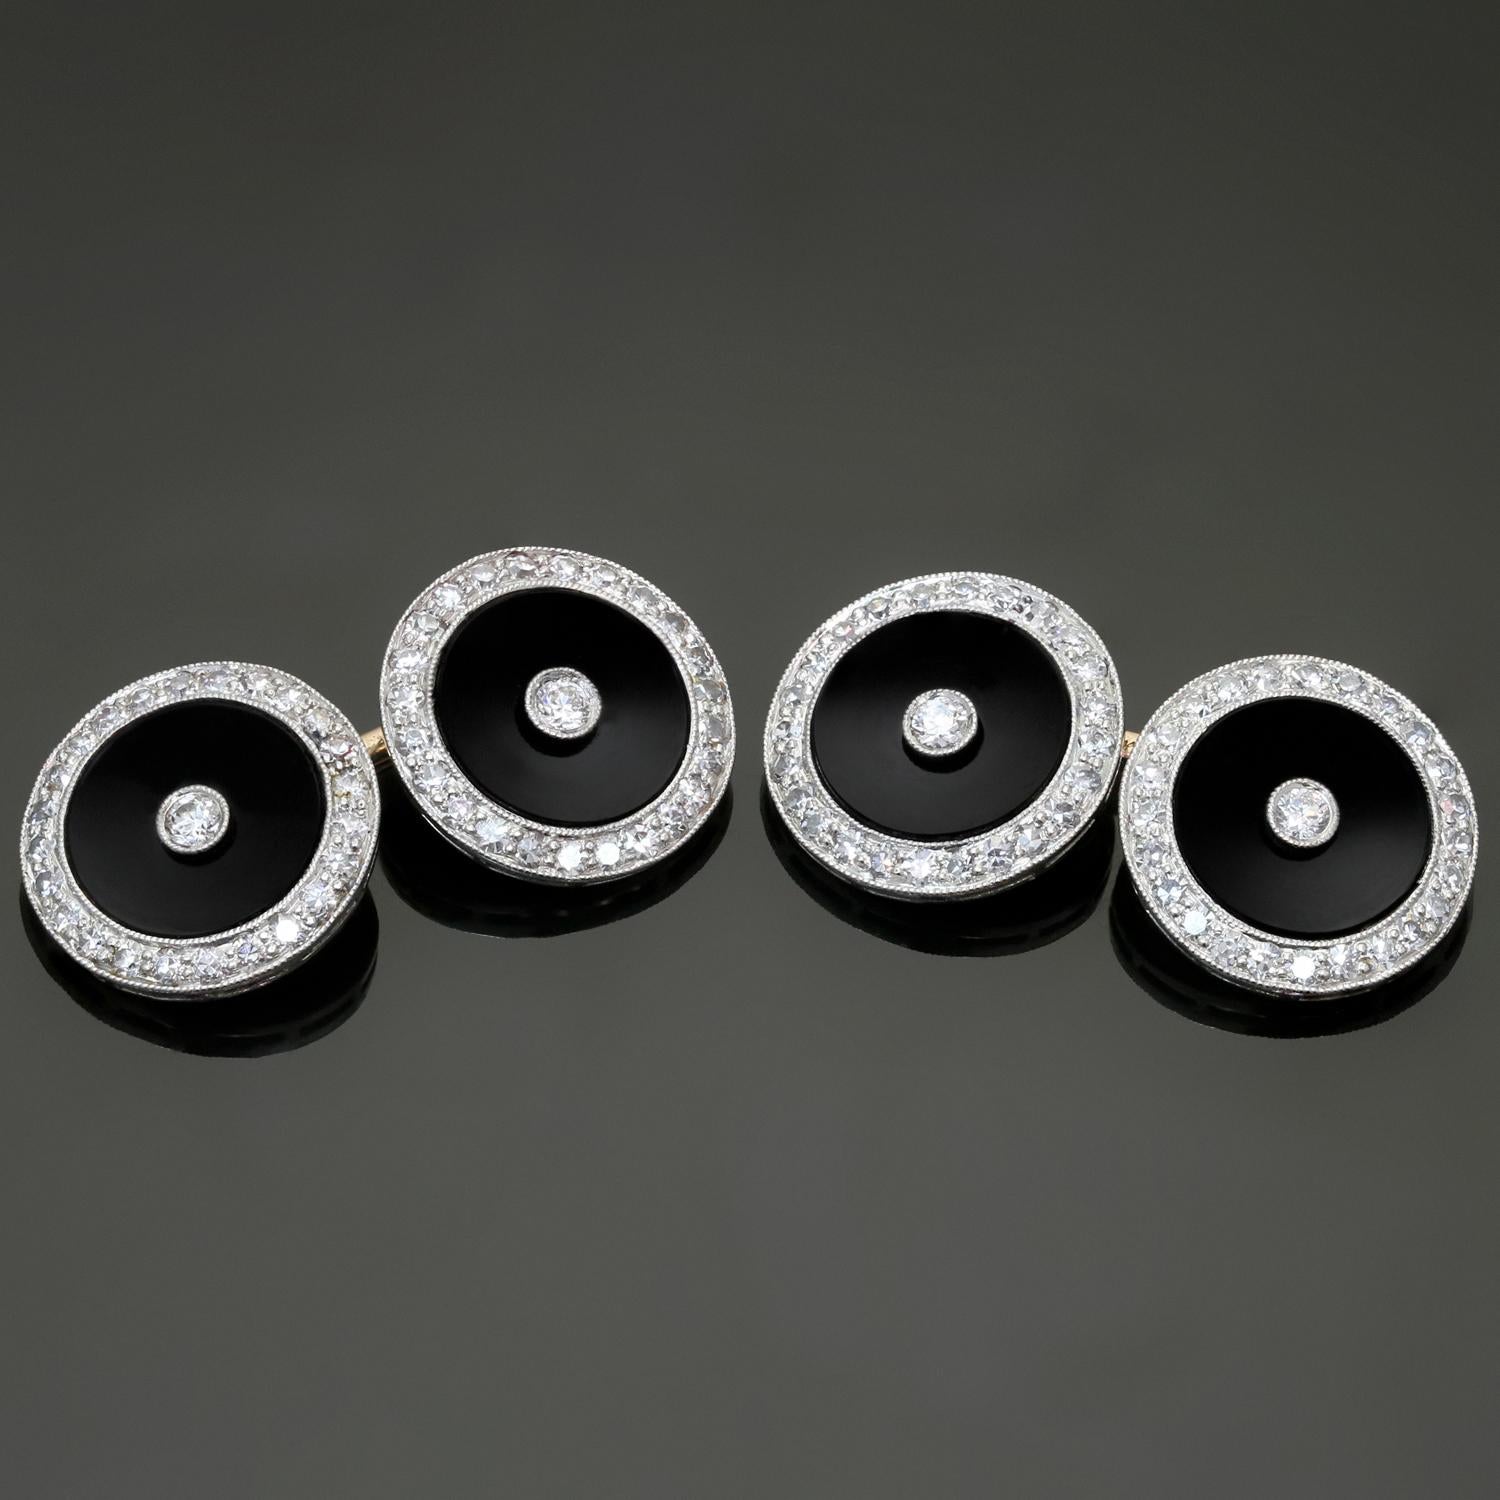 These classic Tiffany & Co. round cufflinks are crafted in platinum and 14k rose gold and set with black onyx and old mine-cut round diamonds of an estimated 1.20 carats. Made in United States circa 1930. Measurements: 0.51